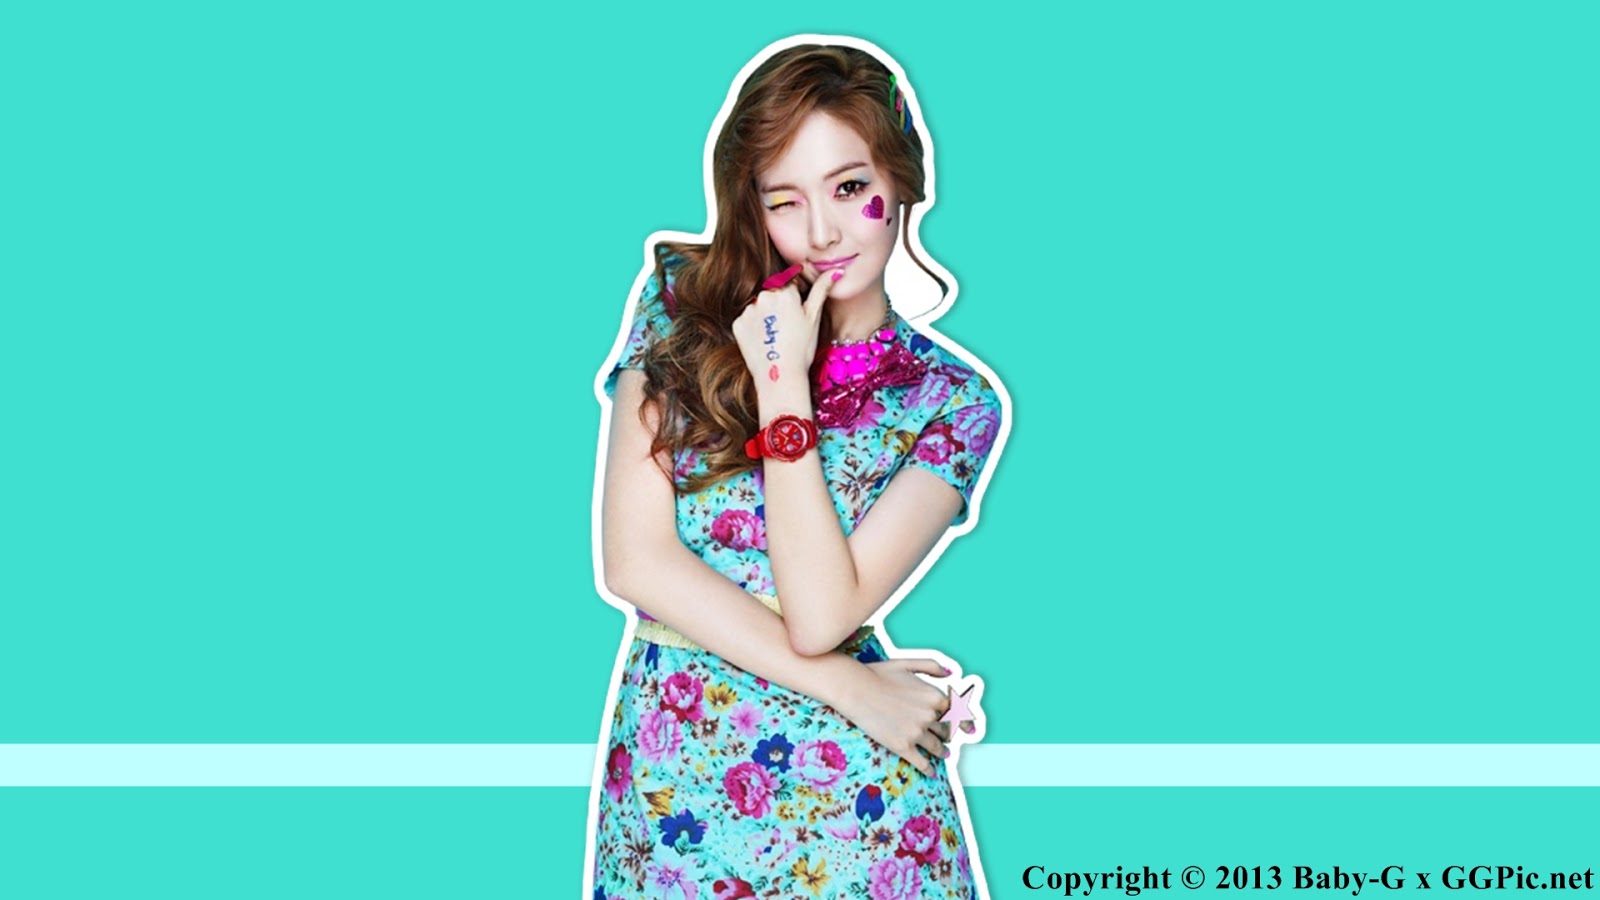 UPDATE WALLPAPER] 130217 SNSD @ CASIO 'Kiss Me Baby-G Ver.' by GGPic